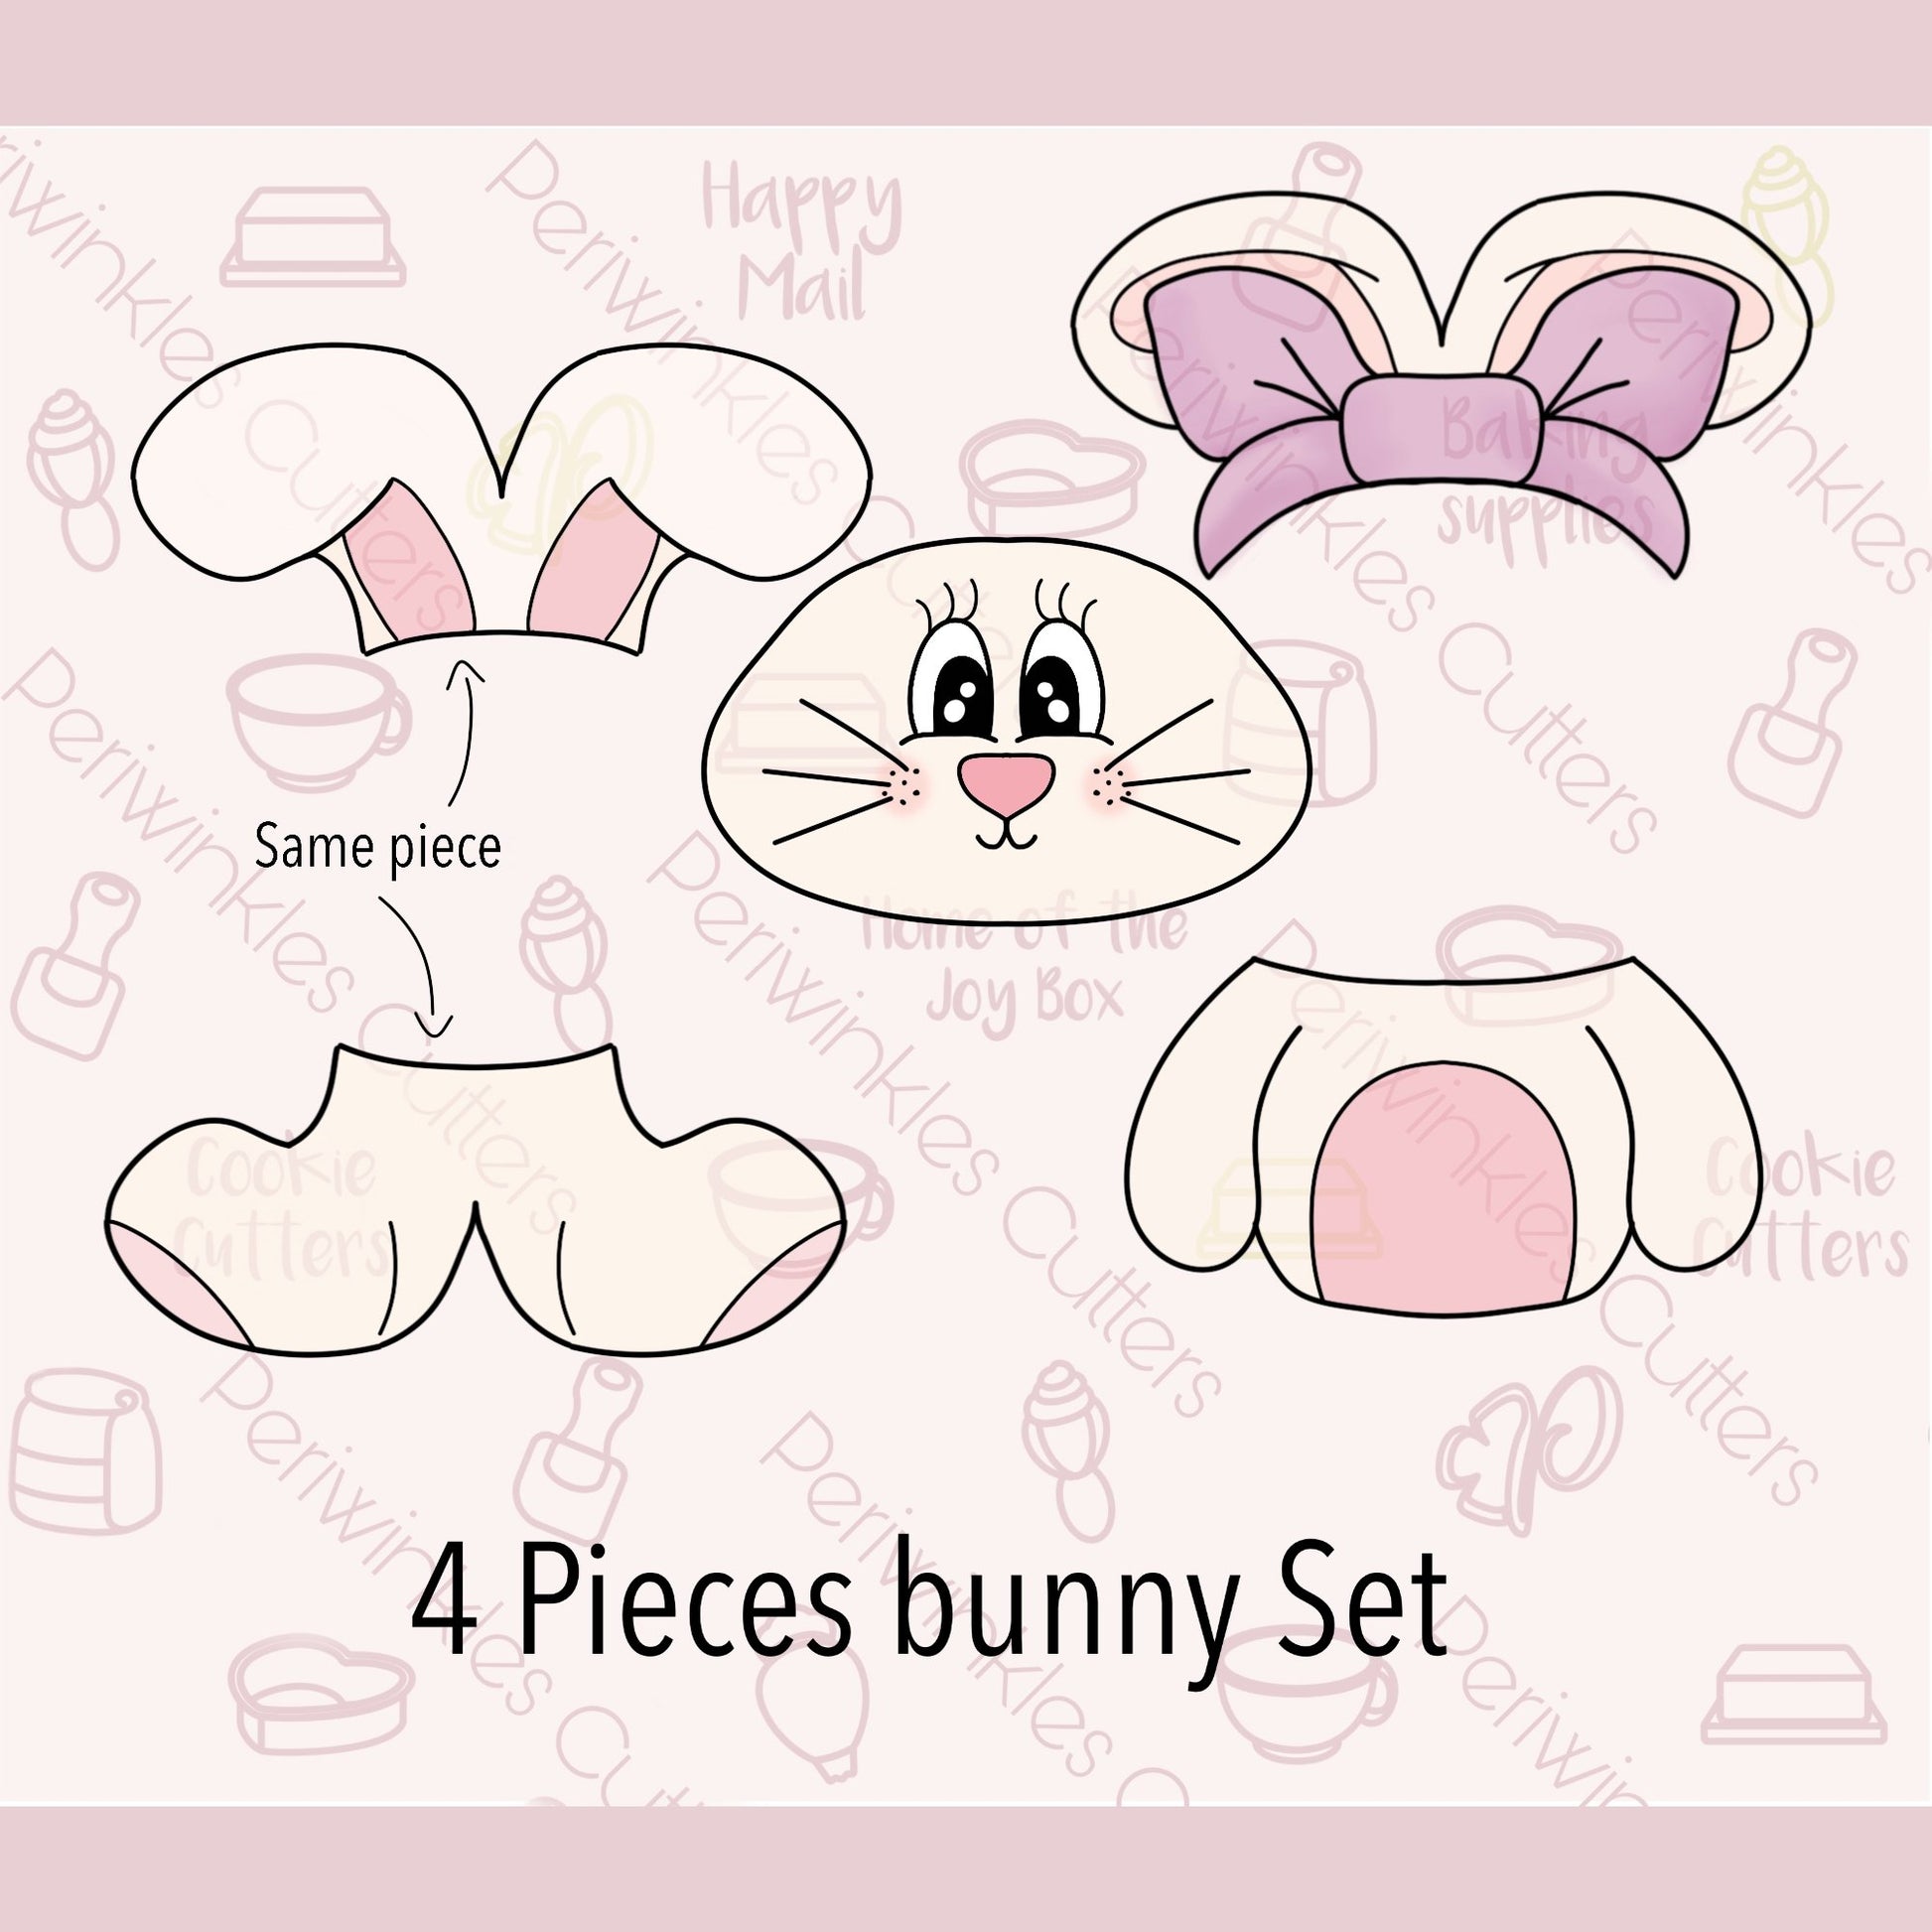 Build a Bunny Set of 4 Cookie Cutters - Periwinkles Cutters